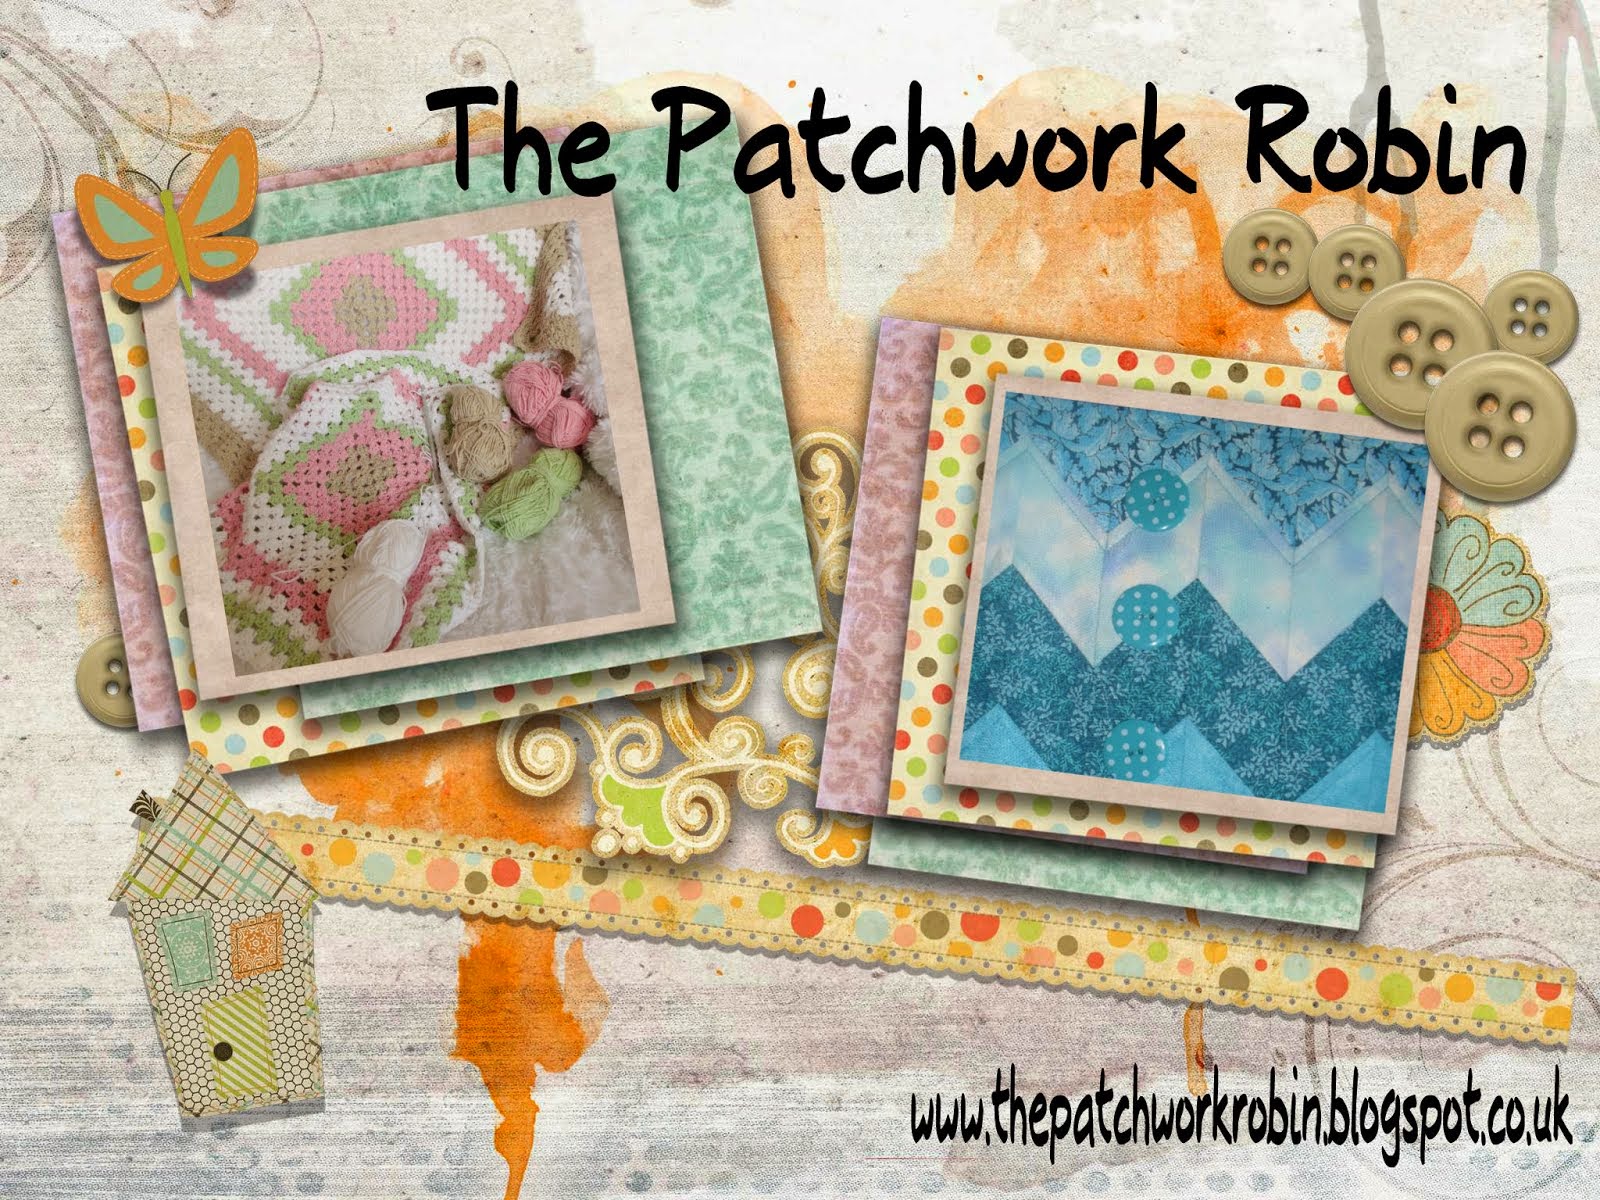 The Patchwork Robin